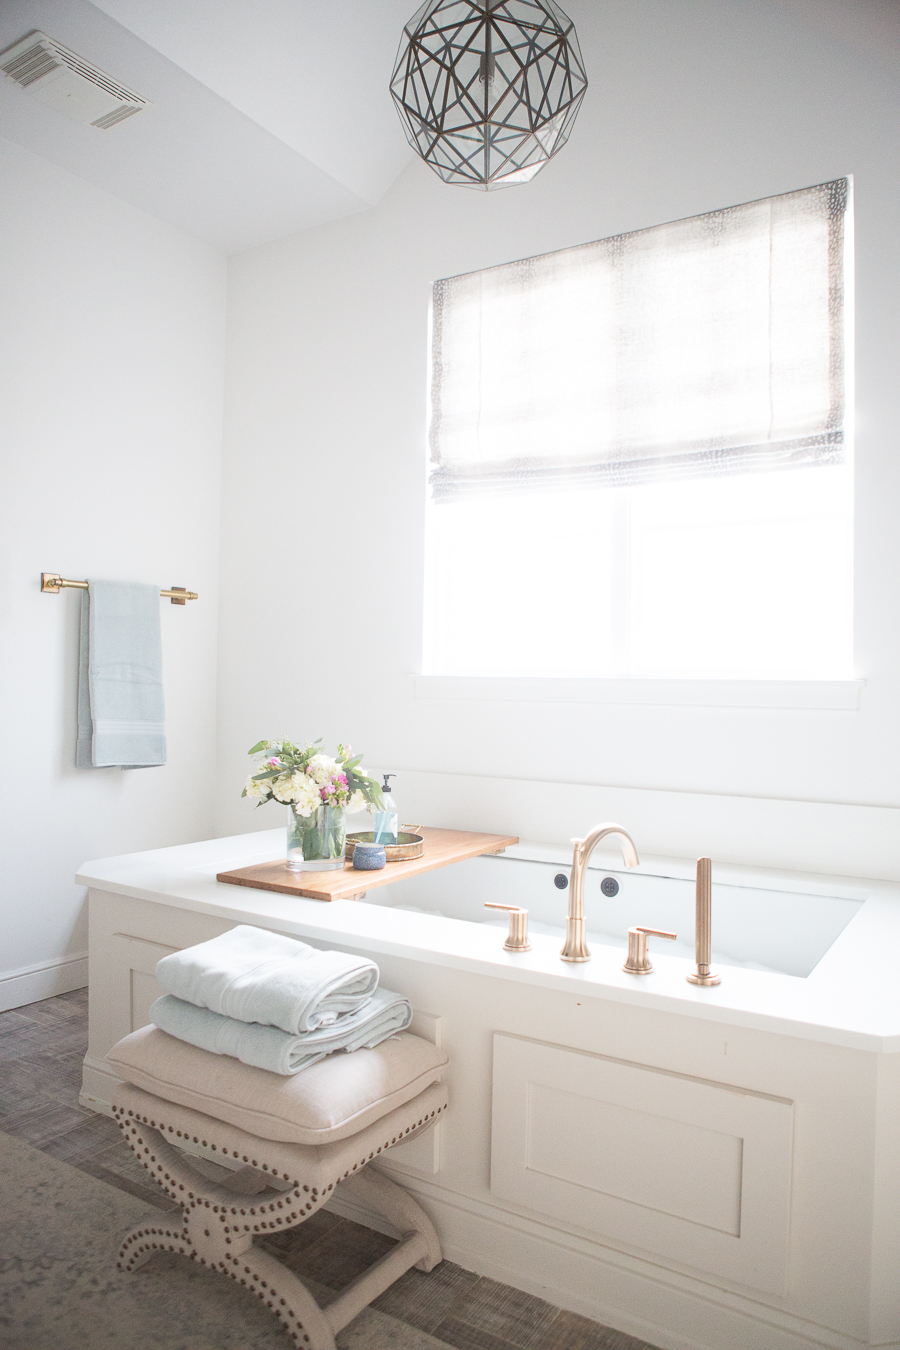 Refresh Your Master Bedroom and Bath with Pottery Barn crisp white bathroom with soaker tub, gold fixtures, a geometric light fixture, and singular window above tub